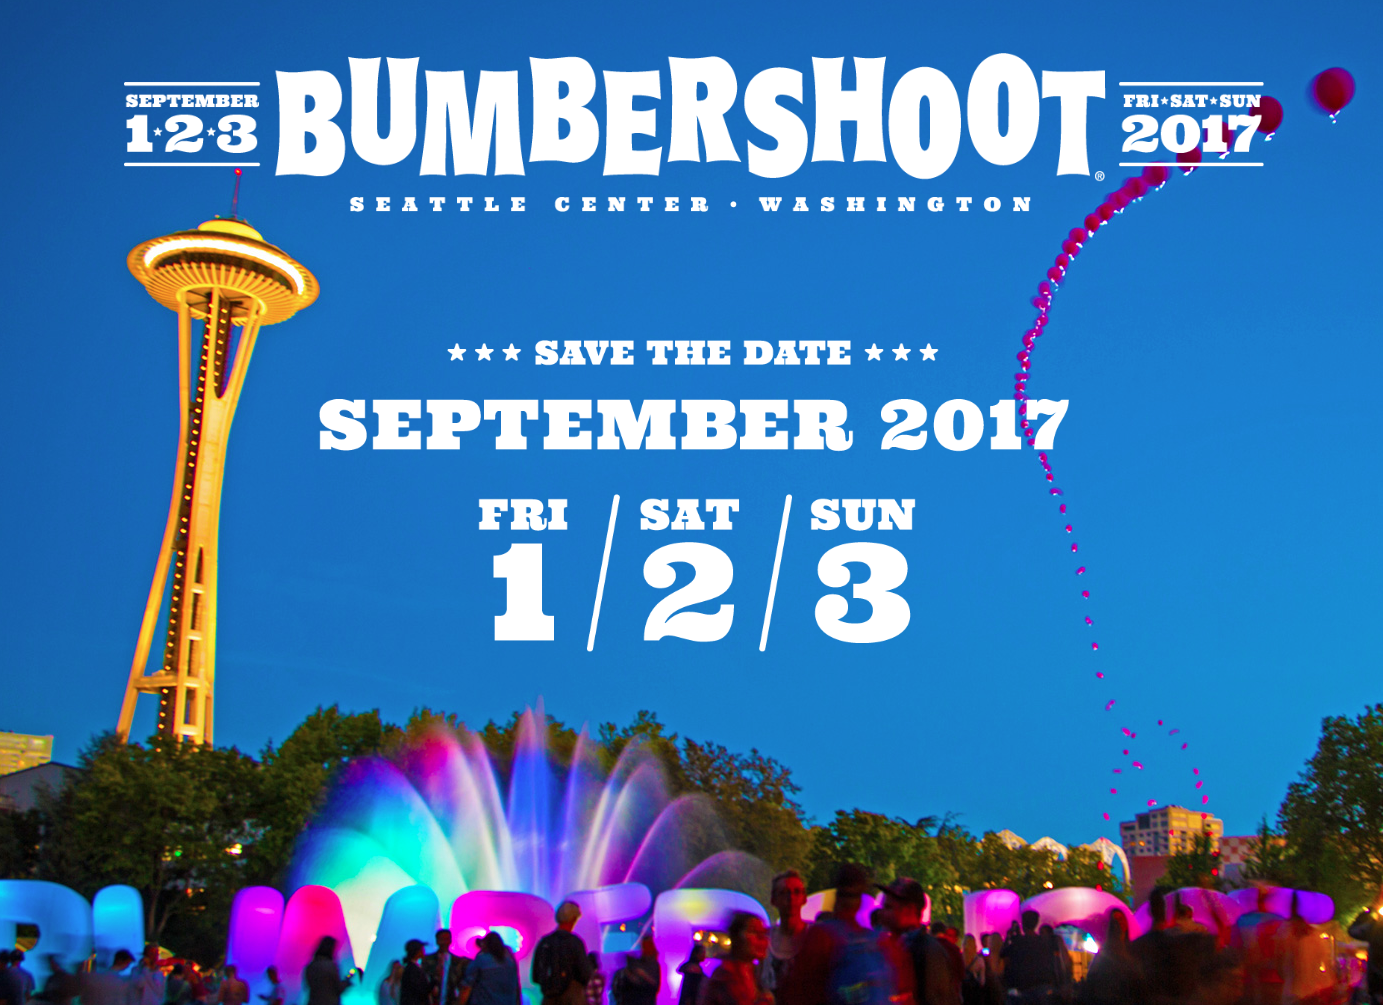 Bumbershoot 2017 Announces Official Lineup. Bands taking part include Spoon, Solange, Lorde